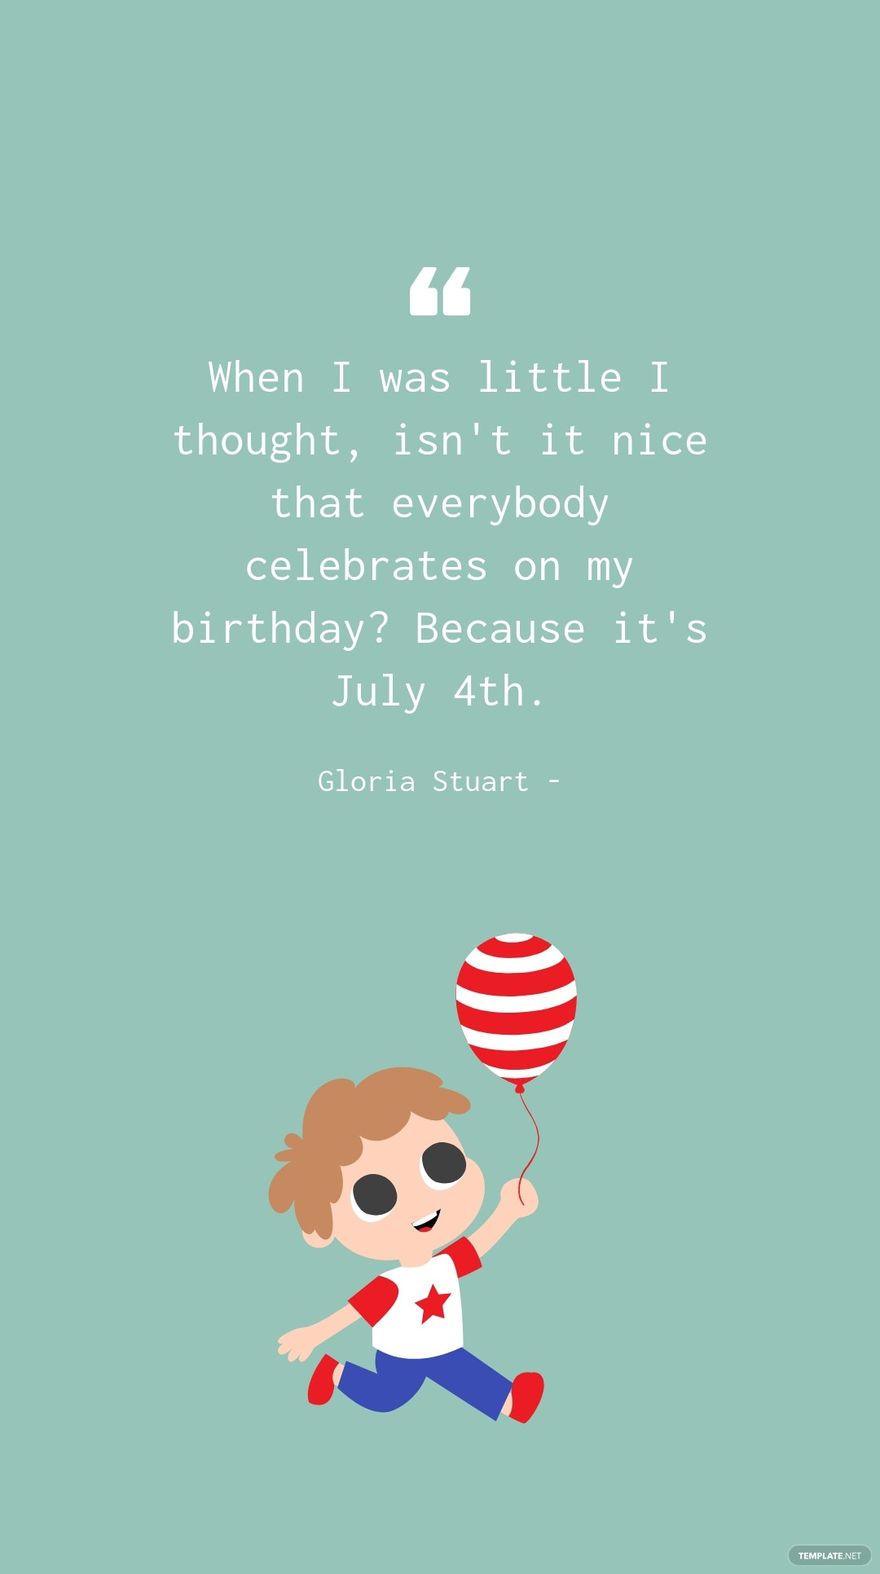 Free Gloria Stuart - When I was little I thought, isn't it nice that everybody celebrates on my birthday? Because it's July 4th. in JPG